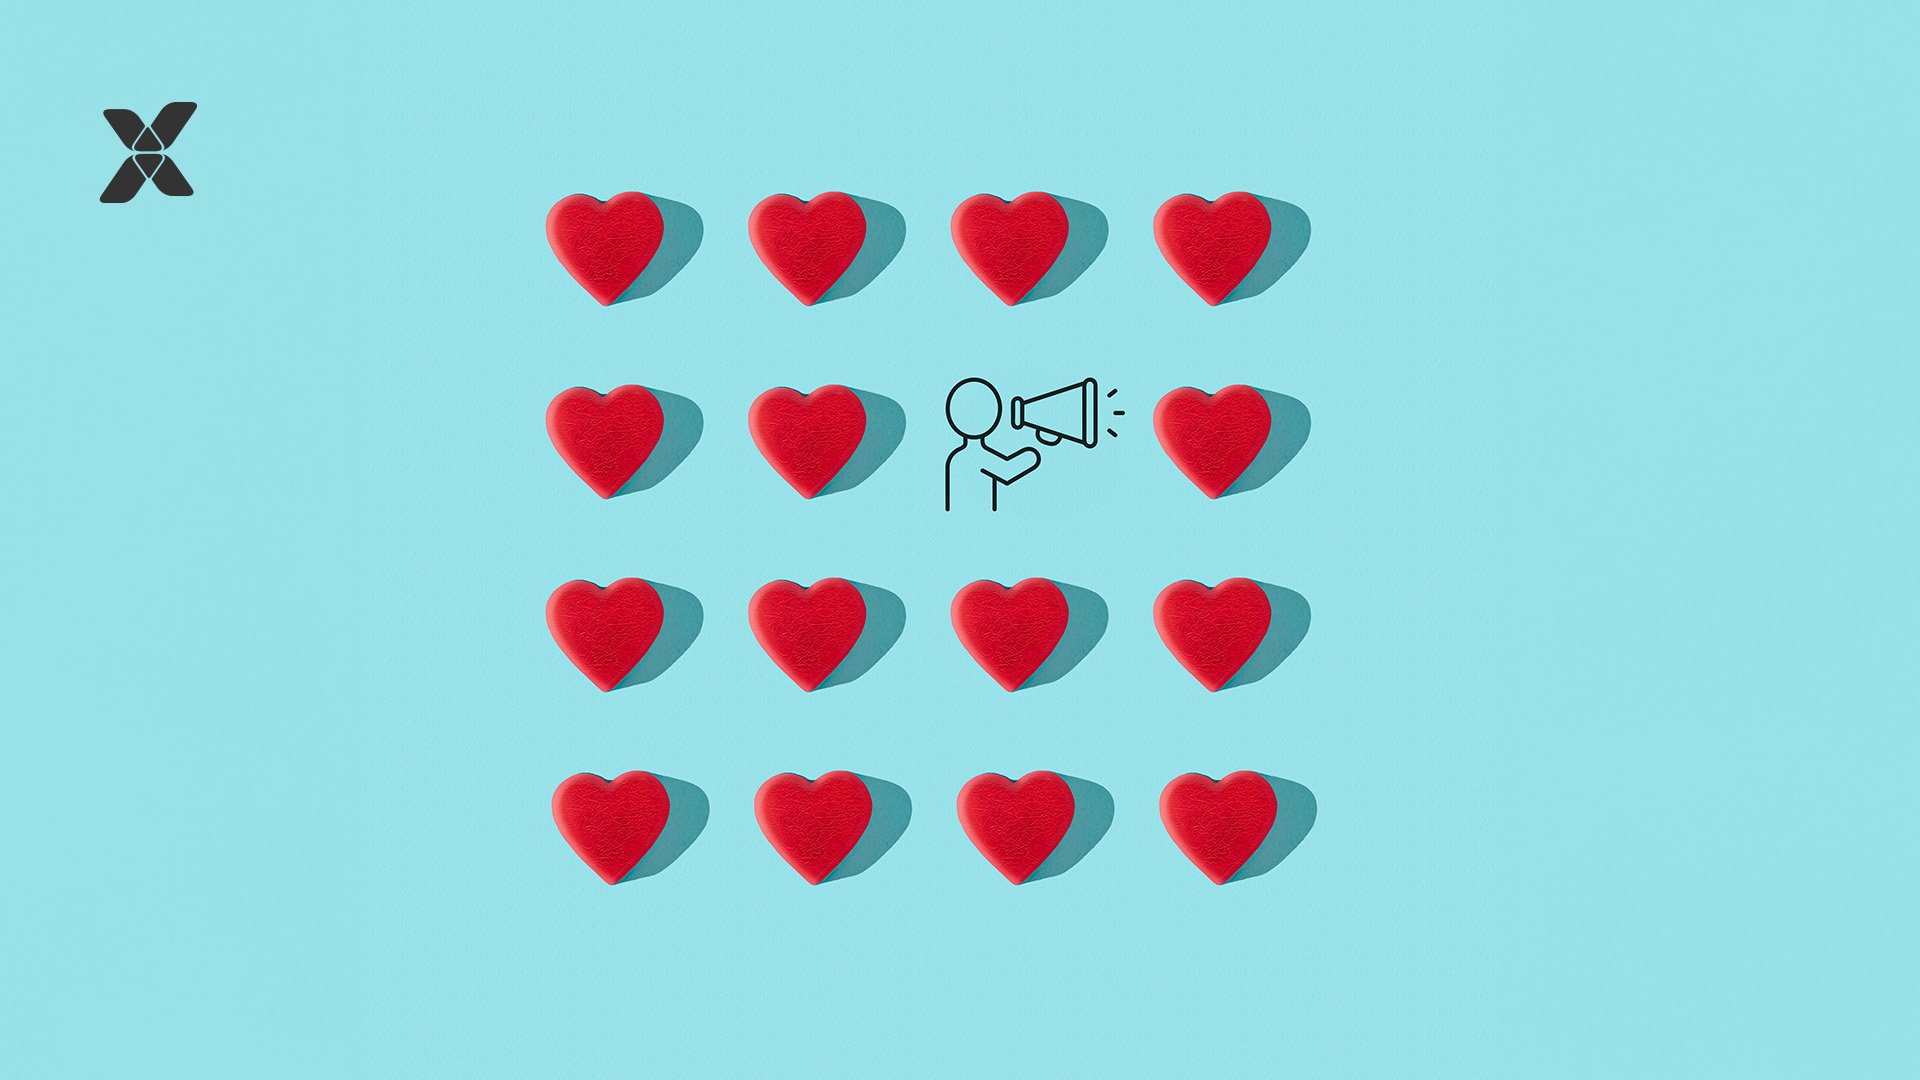 image of red hearts on a blue background arranged in a square with one space filled with a drawn person with a loundspeaker